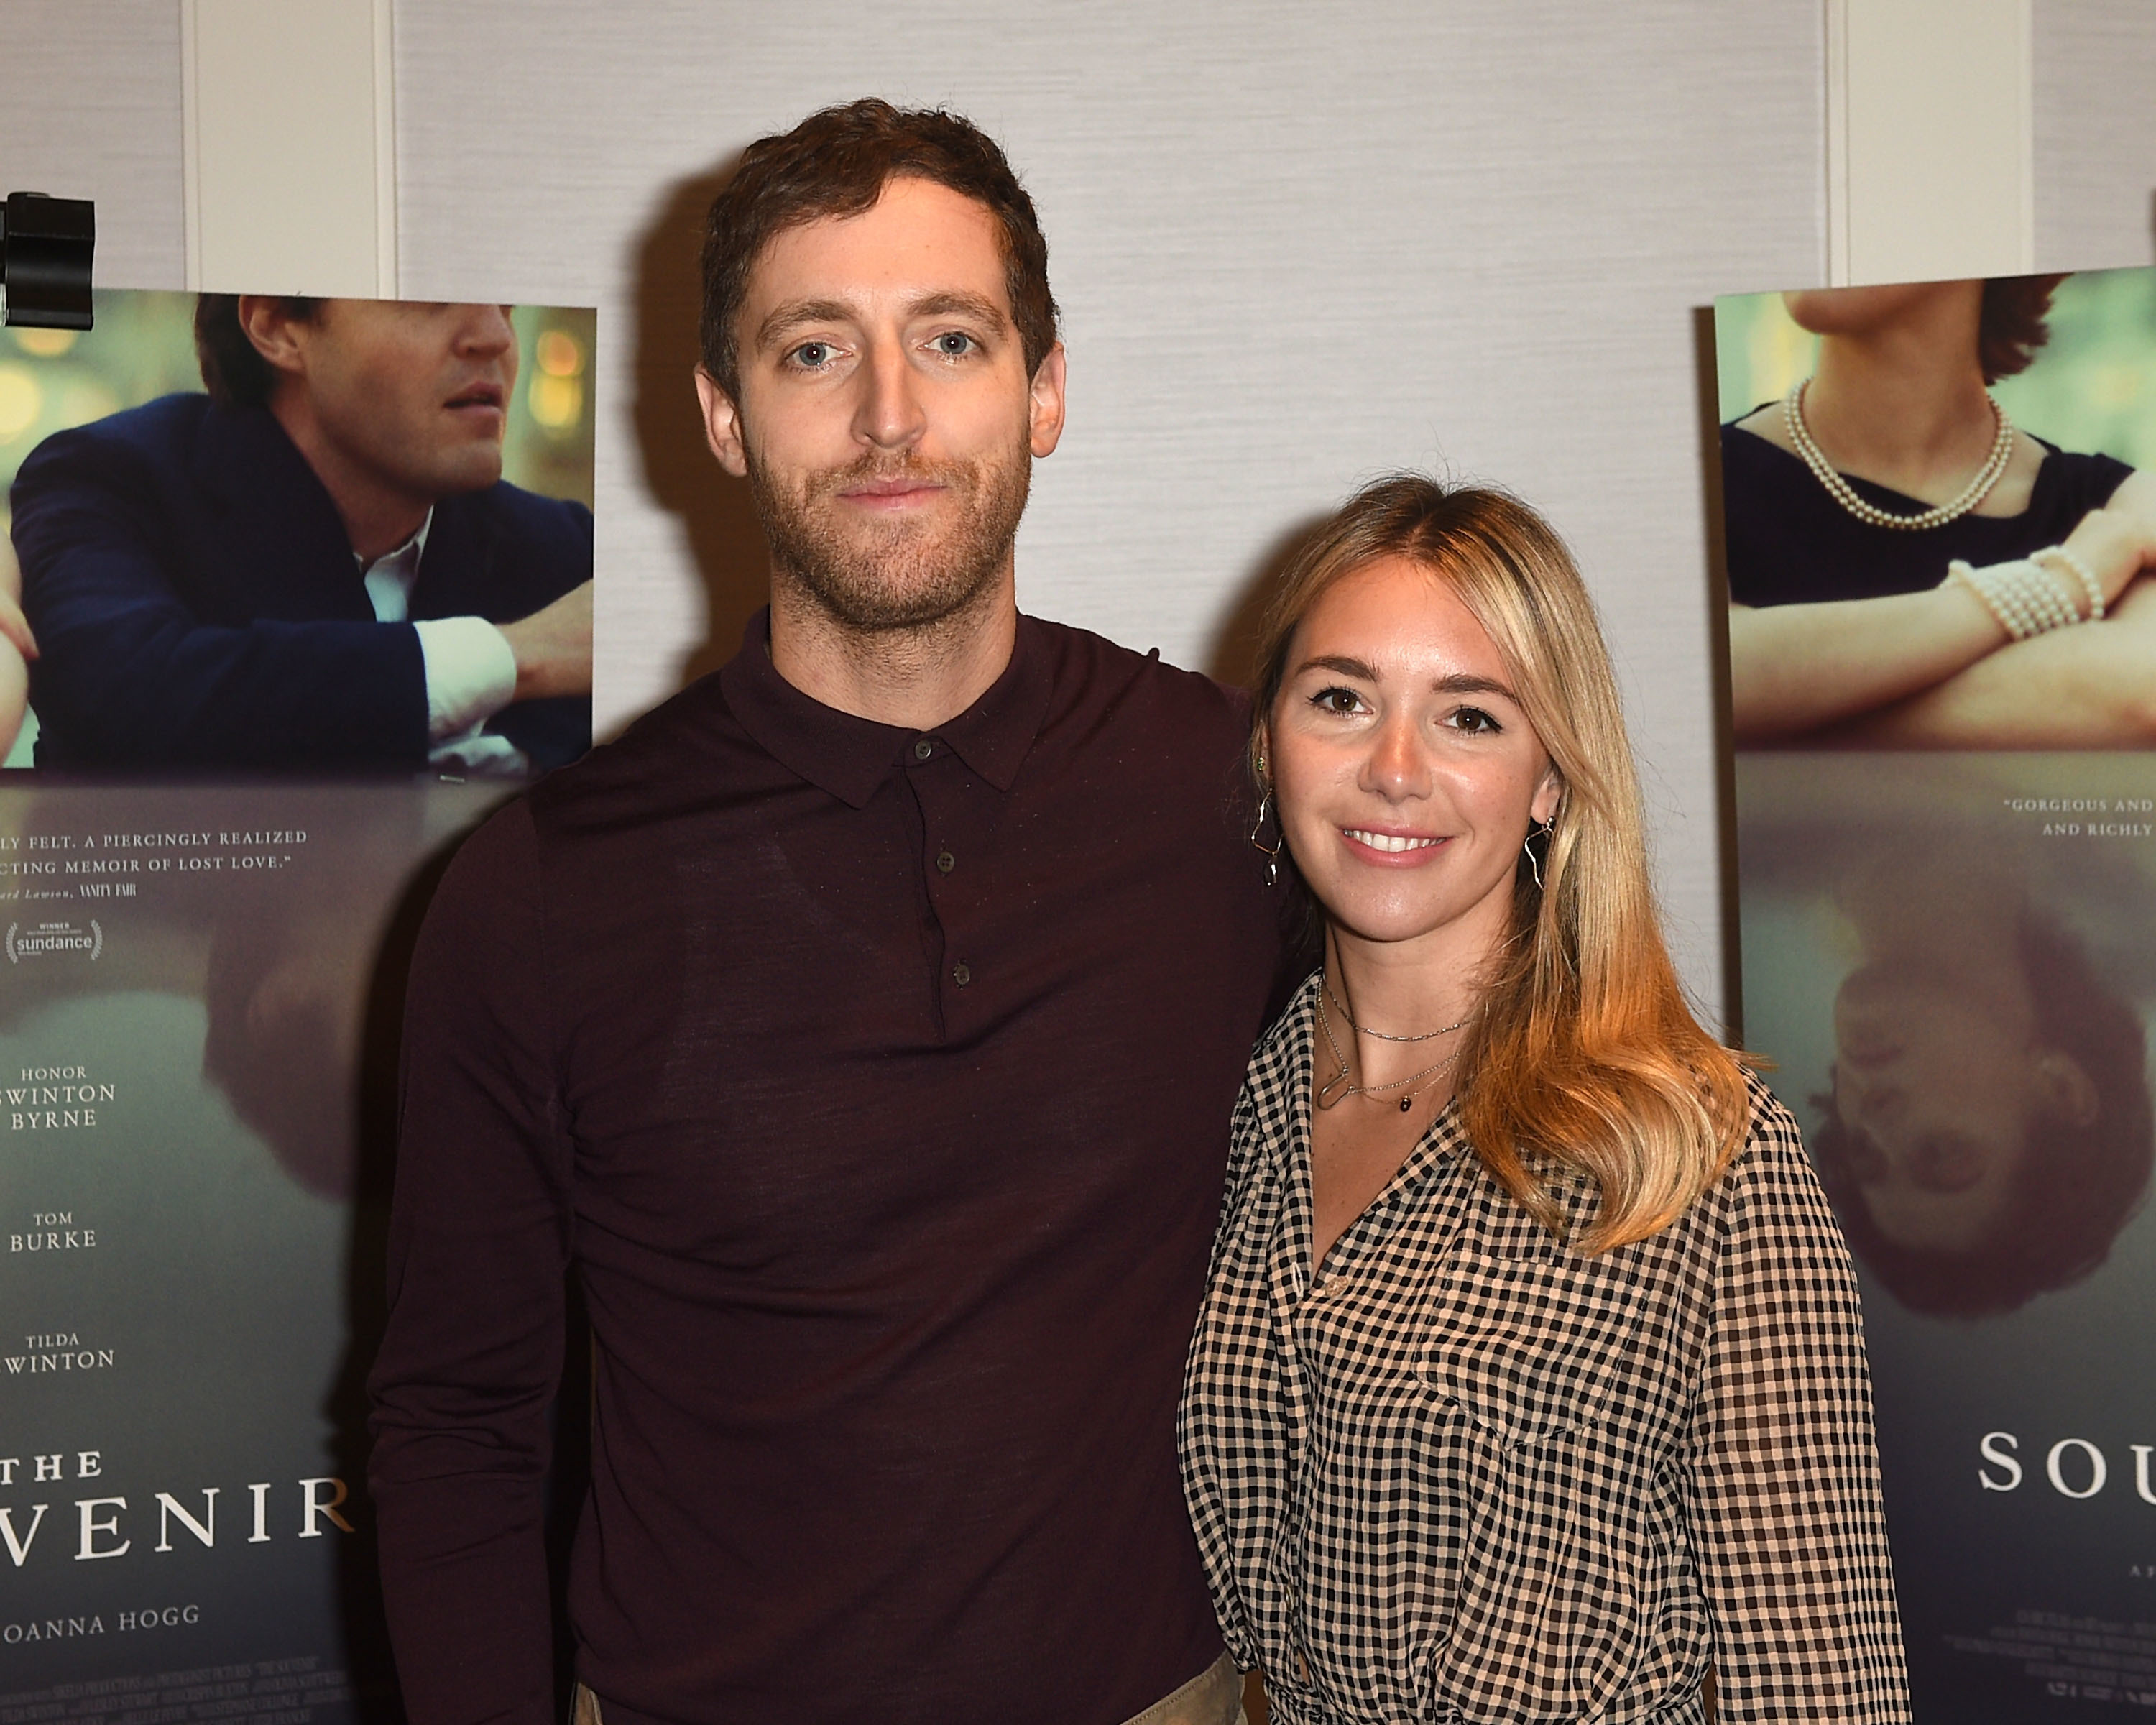 Silicon Valleys Thomas Middleditch says he and wife are swingers Wonderwall image